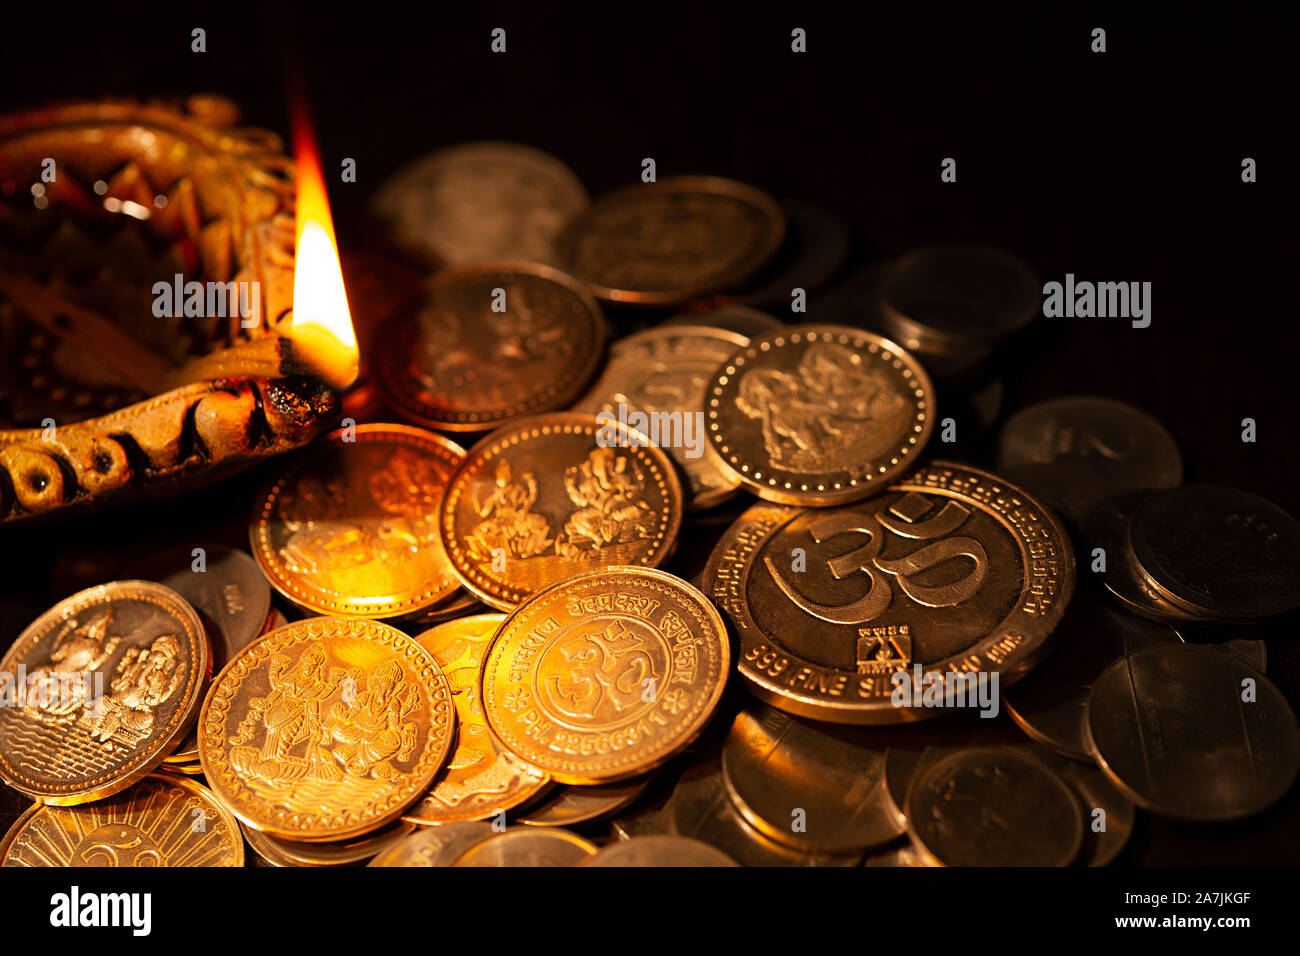 Nobody Shot Diwali oil lamps with gold coins during Diwali festival Celebration Stock Photo